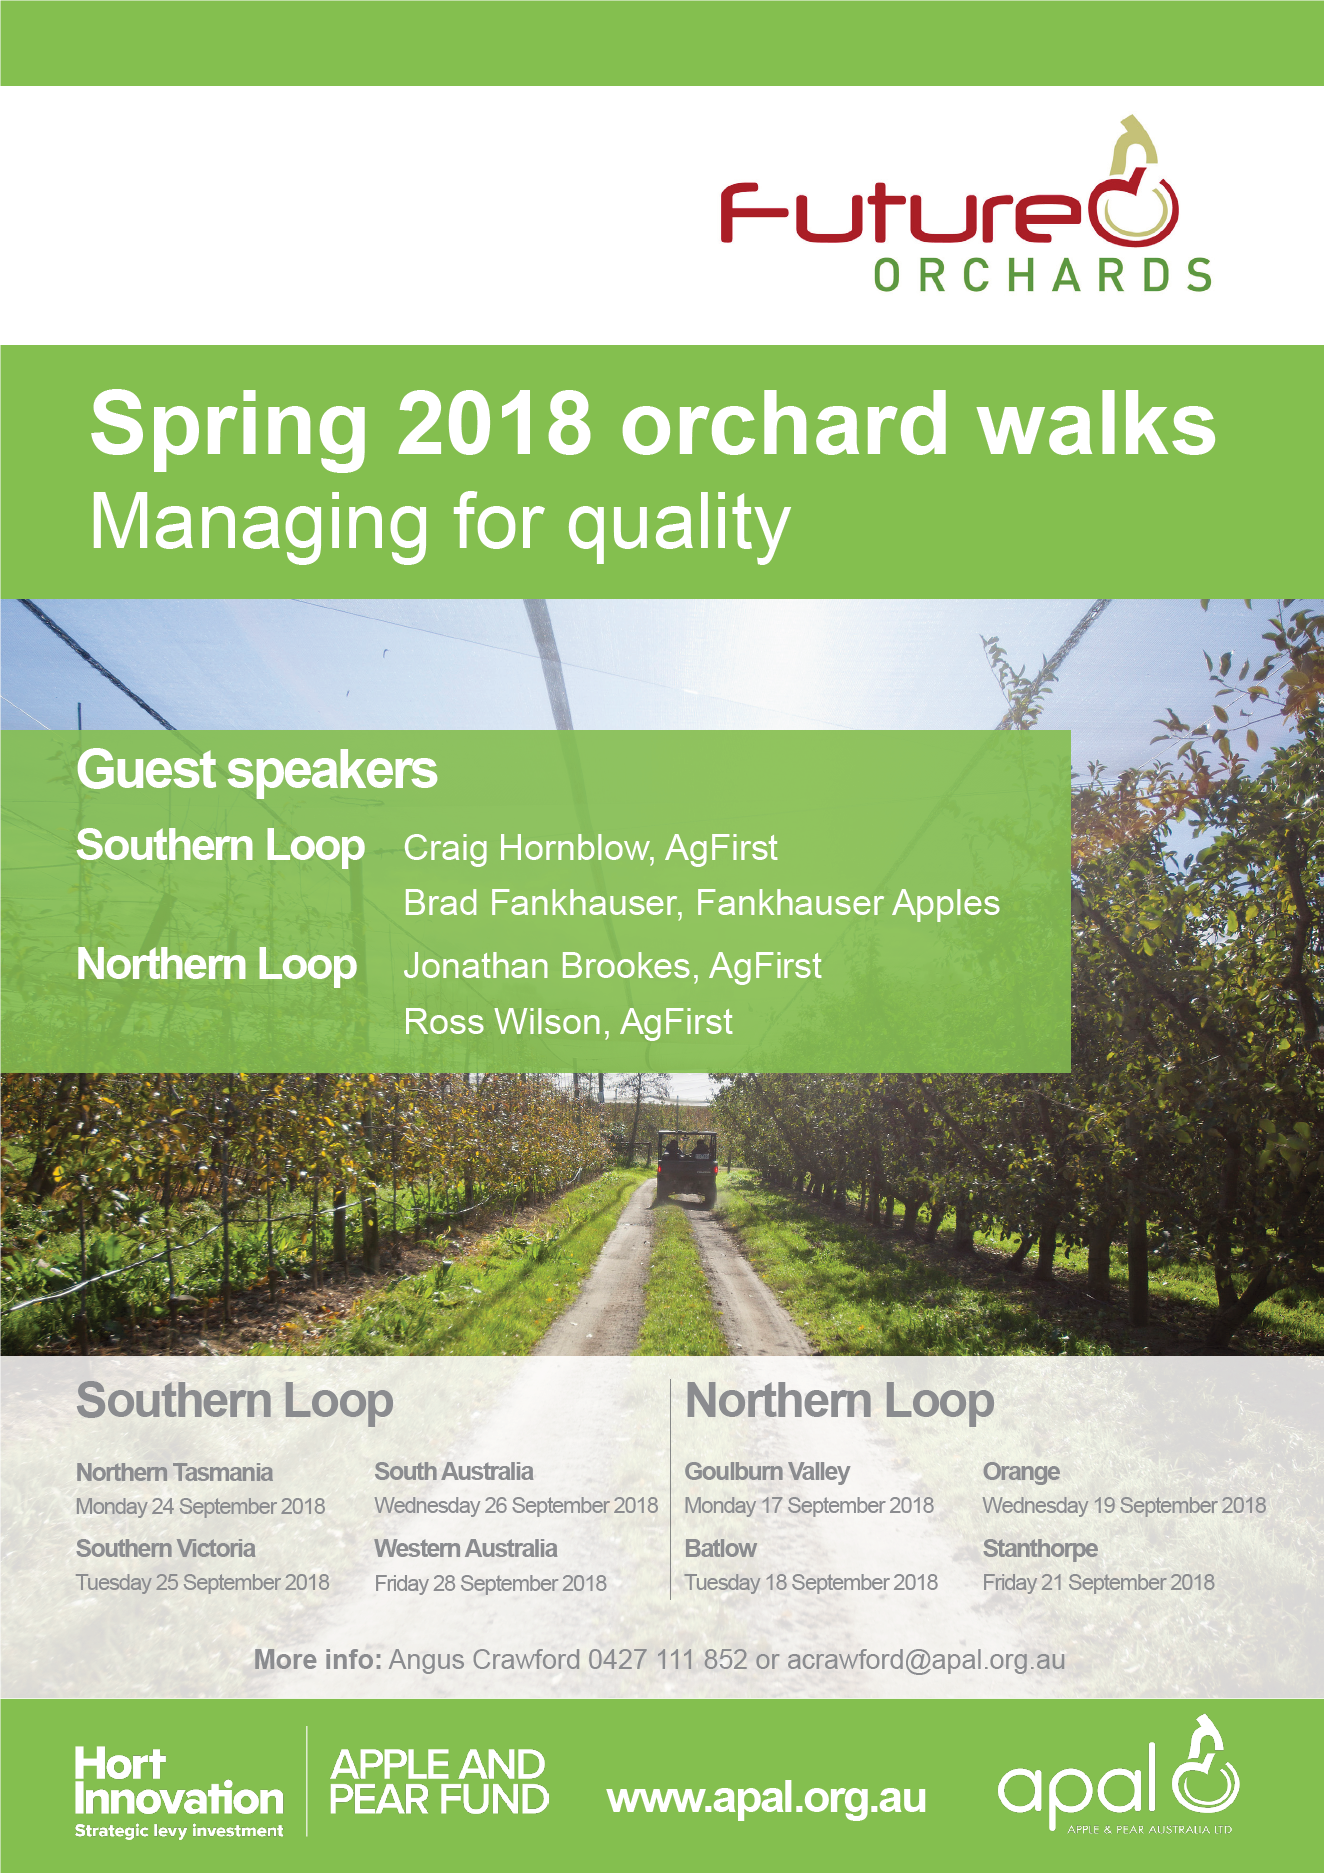 Future Orchards 'Spring Orchard Walks'- Goulburn Valley- Turnbull Bros Ardmona: Monday 17th September. Southern Victoria: Vernview orchard Launching Place, Yarra Valley- Tuesday 25th September 